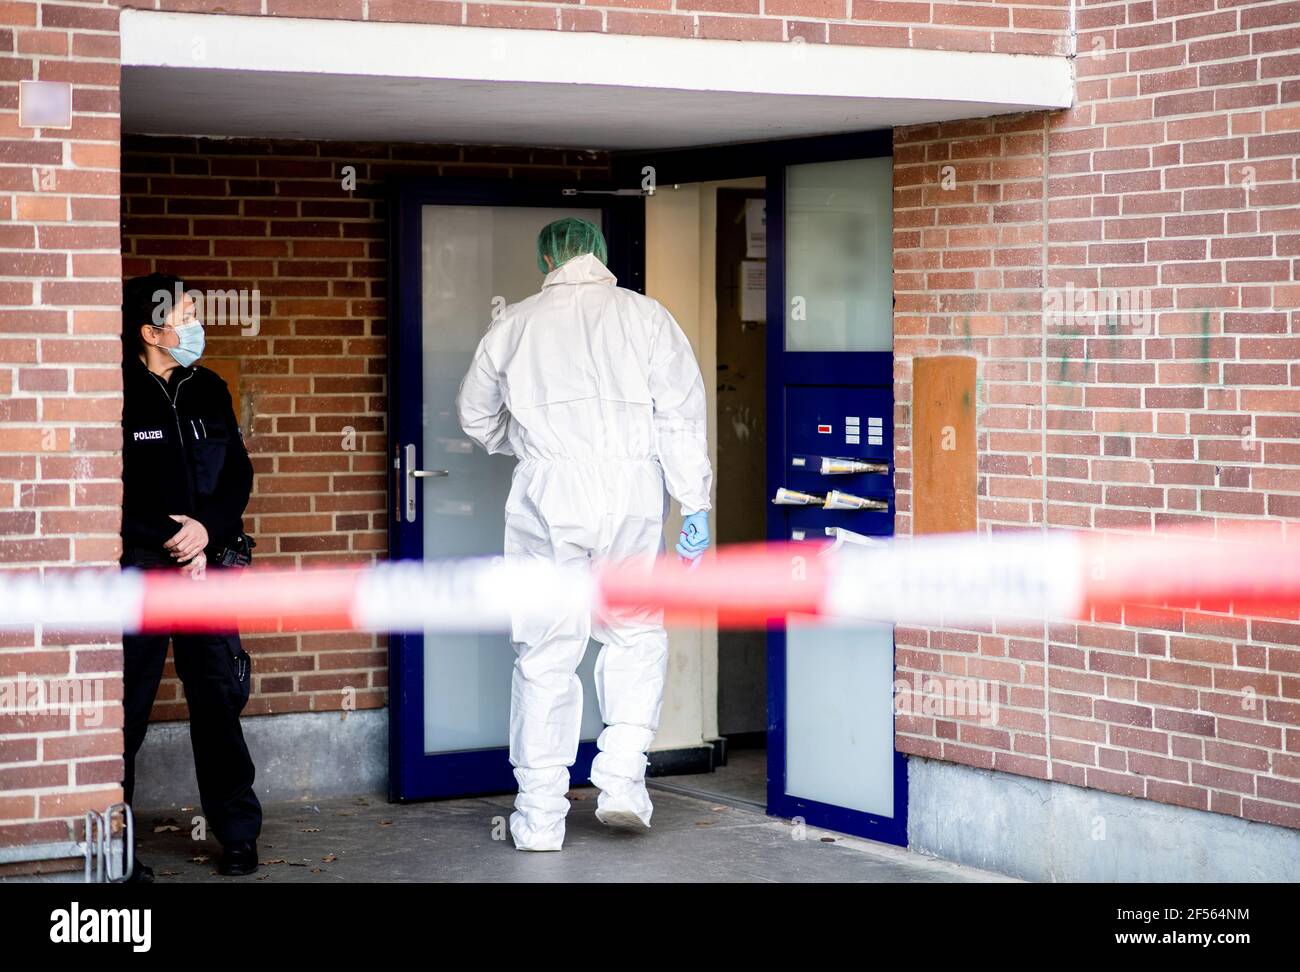 Delmenhorst, Germany. 24th Mar, 2021. A forensics investigator enters an apartment building. A woman has died in a homicide. The 28-year-old victim was fatally injured with a knife, a police spokeswoman said. Credit: Hauke-Christian Dittrich/dpa - ATTENTION: Name plates on the doorbells and house number have been pixelated for legal reasons/dpa/Alamy Live News Stock Photo